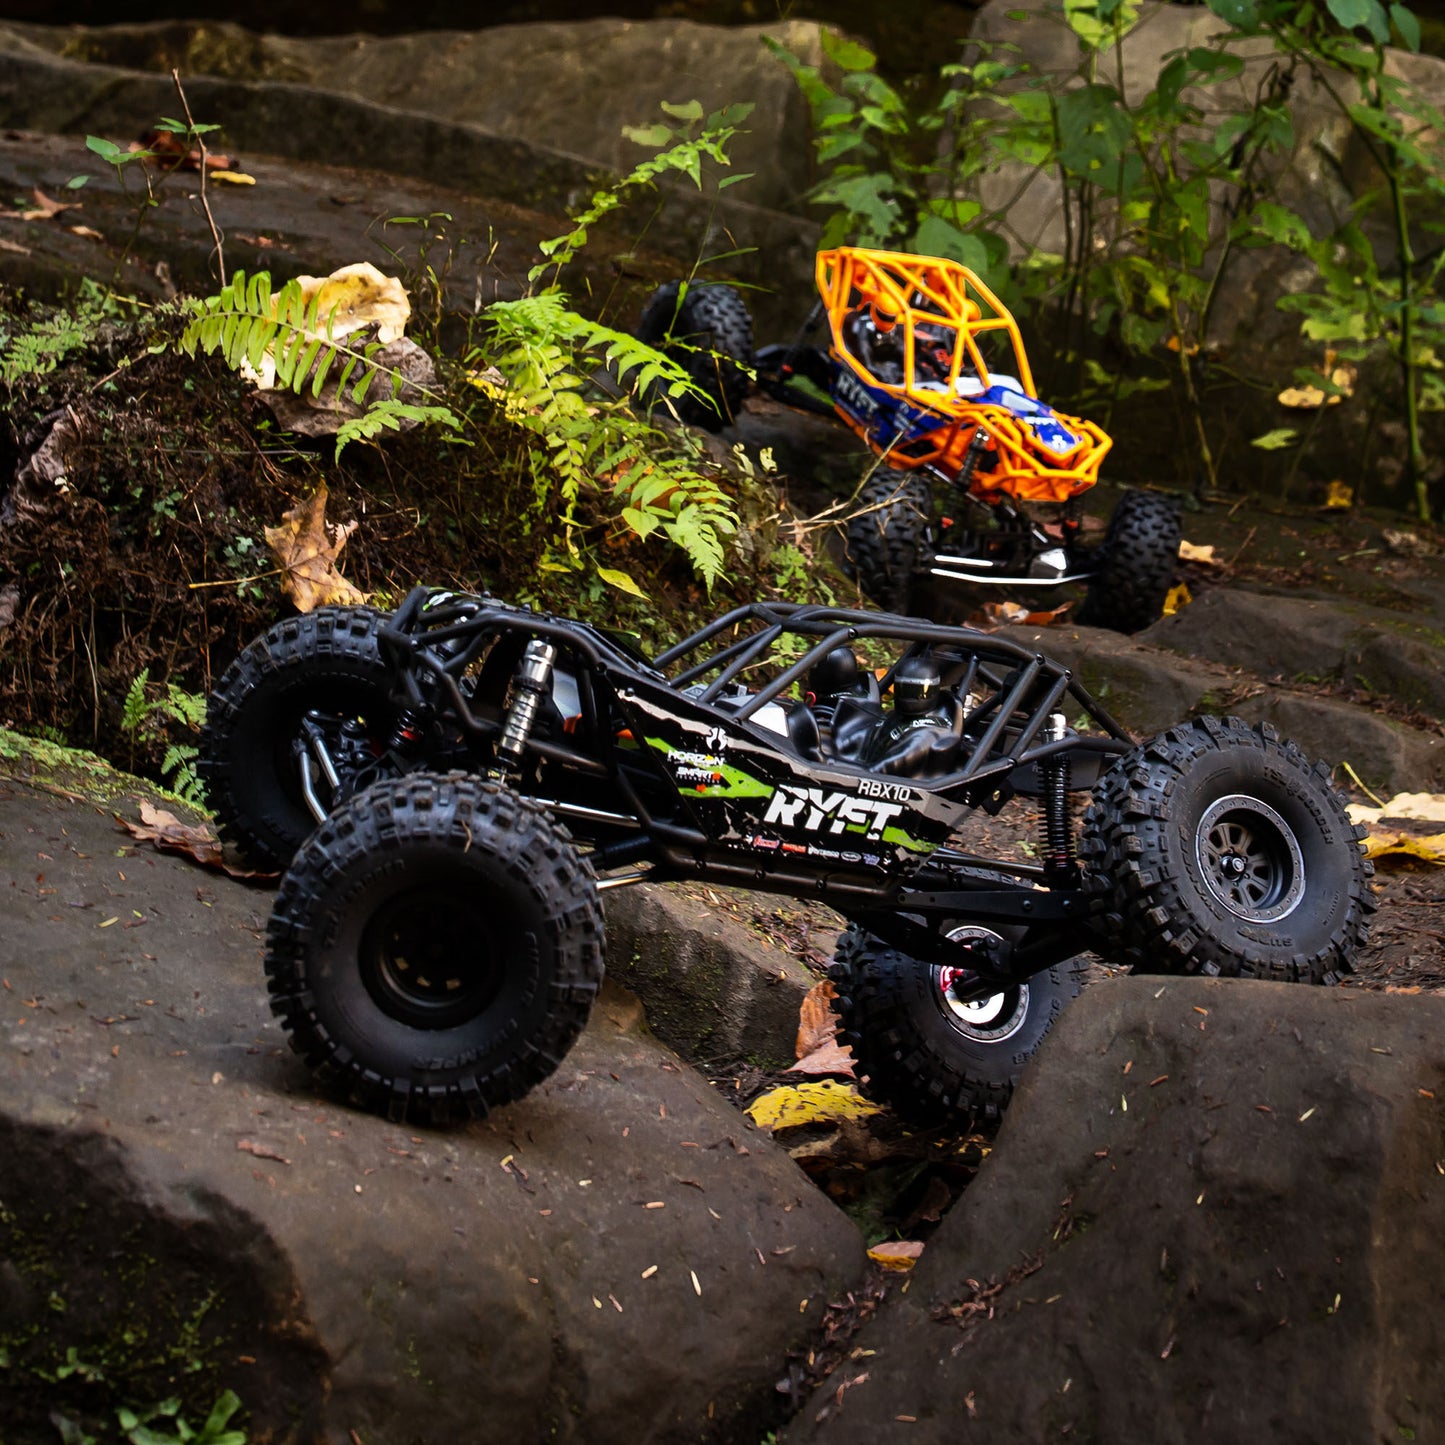 1/10 RBX10 Ryft 4WD Brushless Rock Bouncer RTR Black